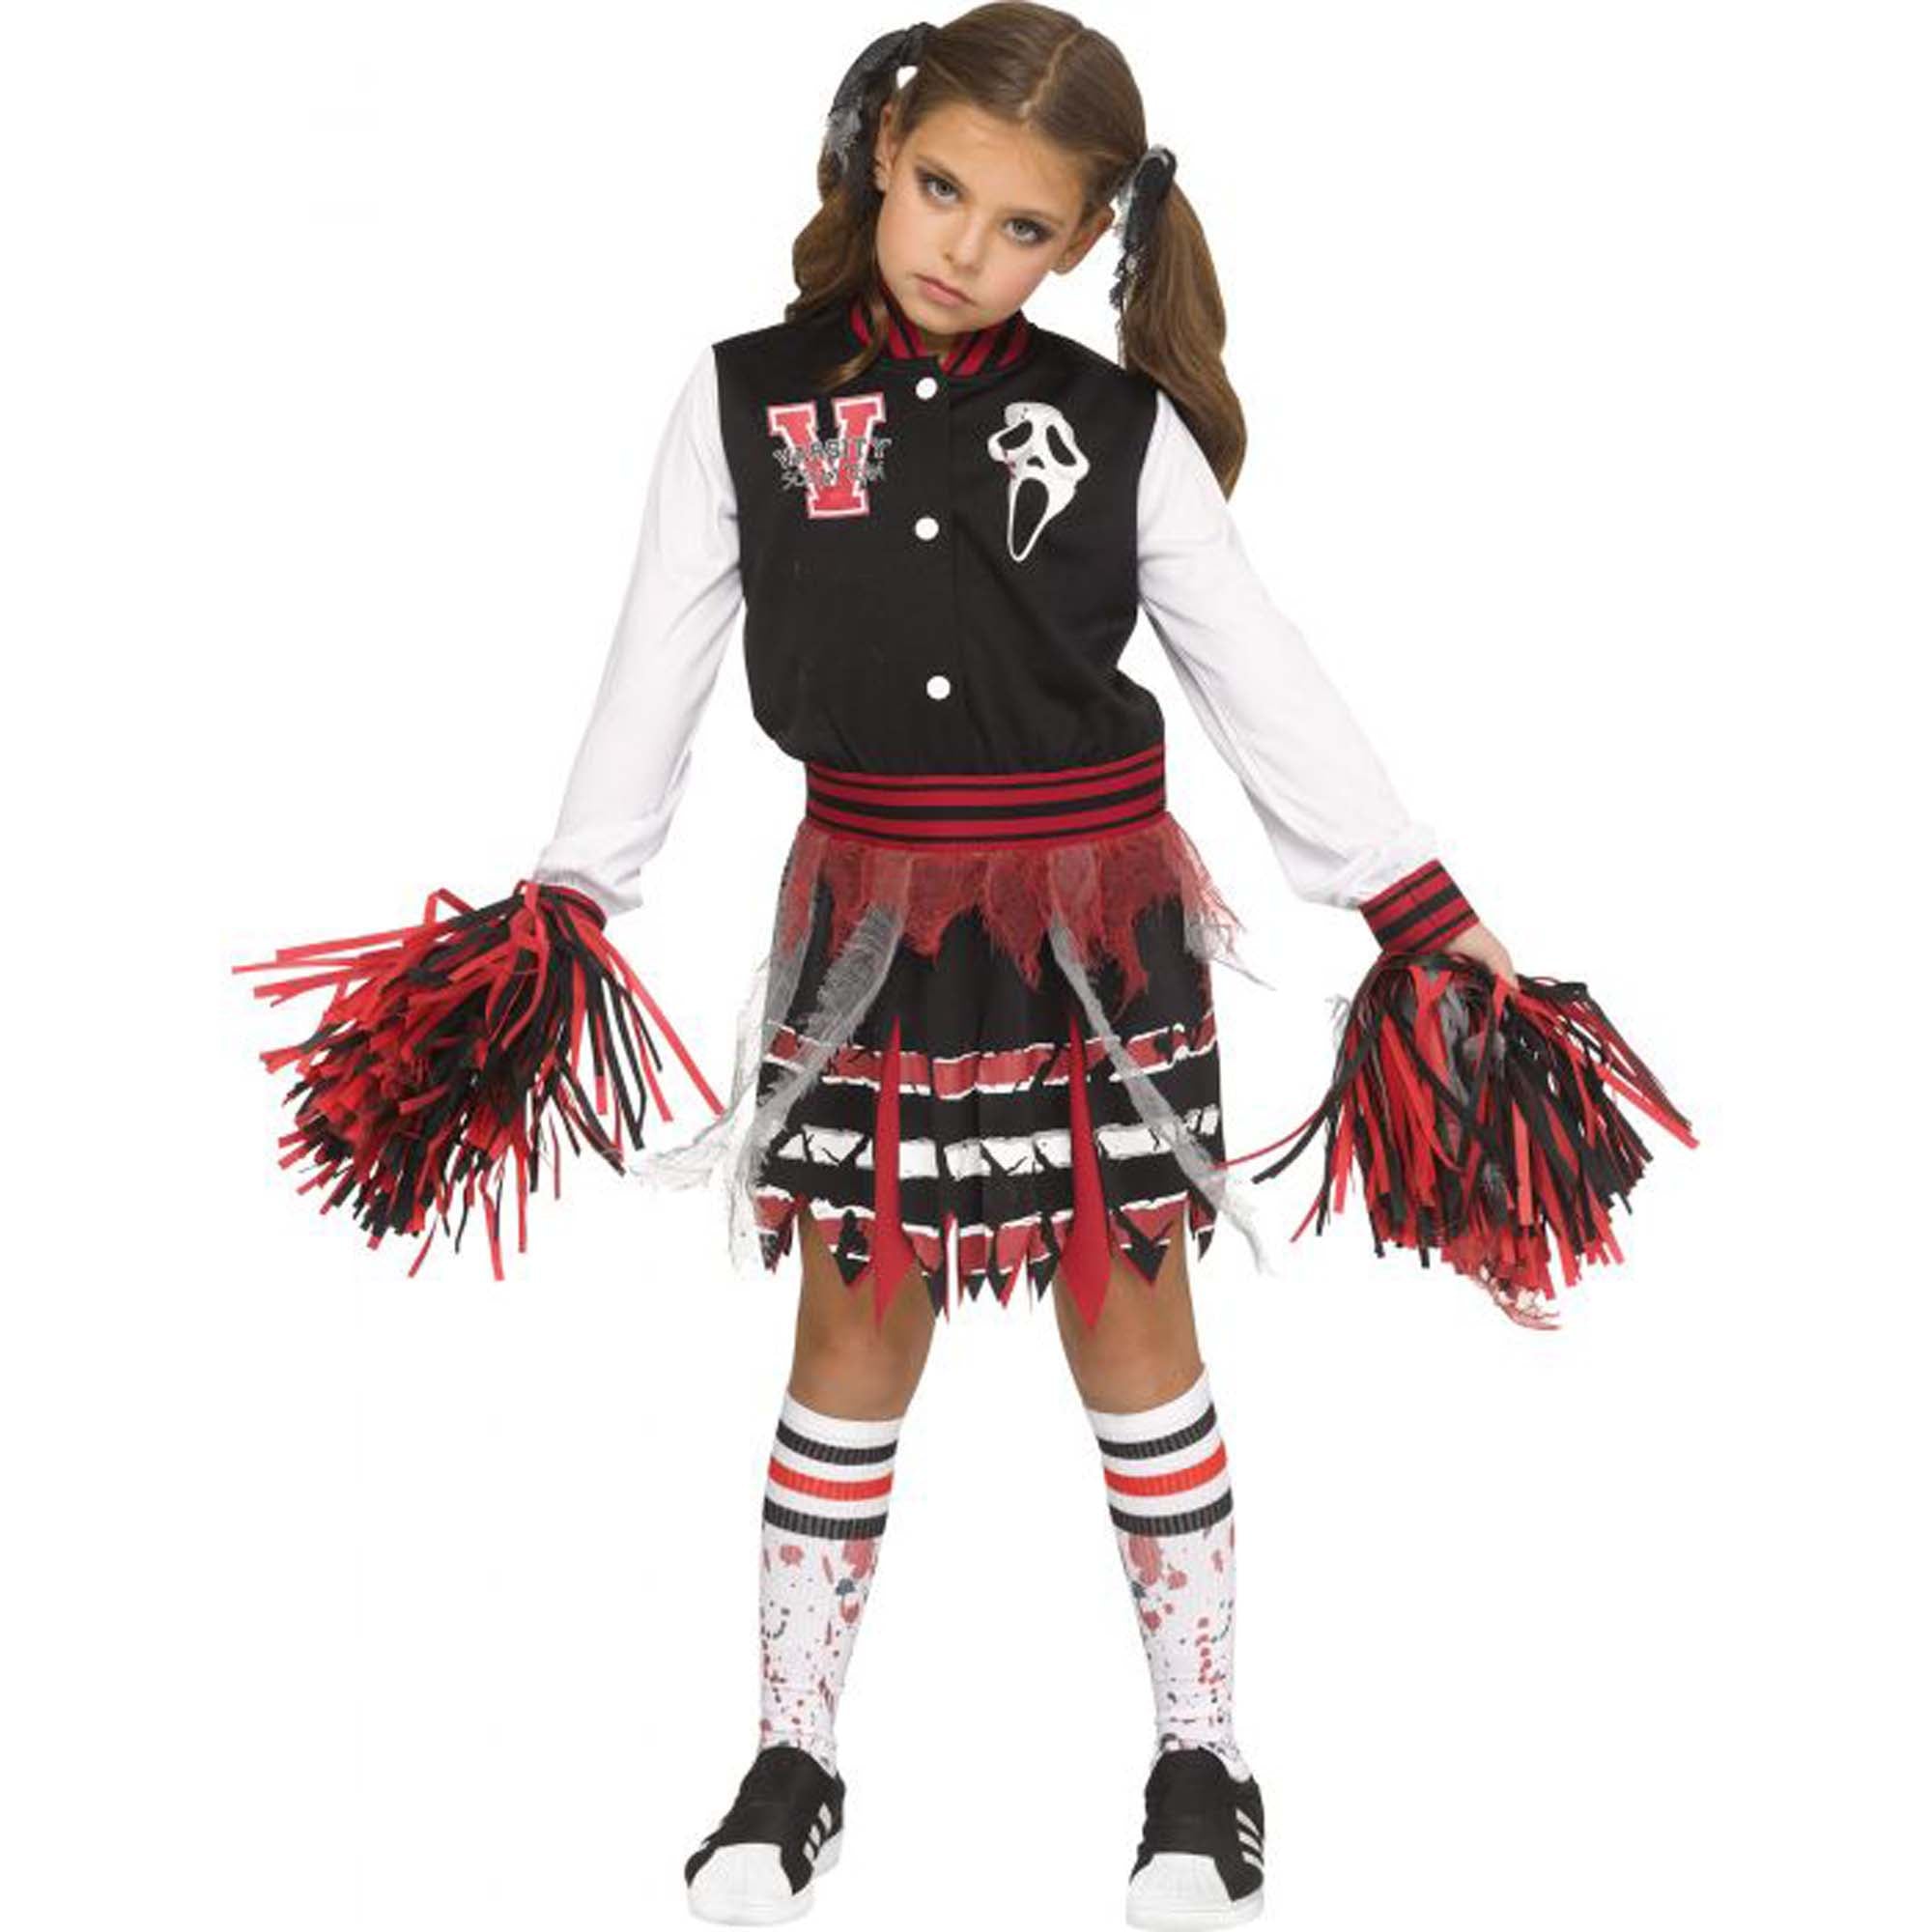 Scream for the Team! Cheerleader Costume for Kids | Party Expert